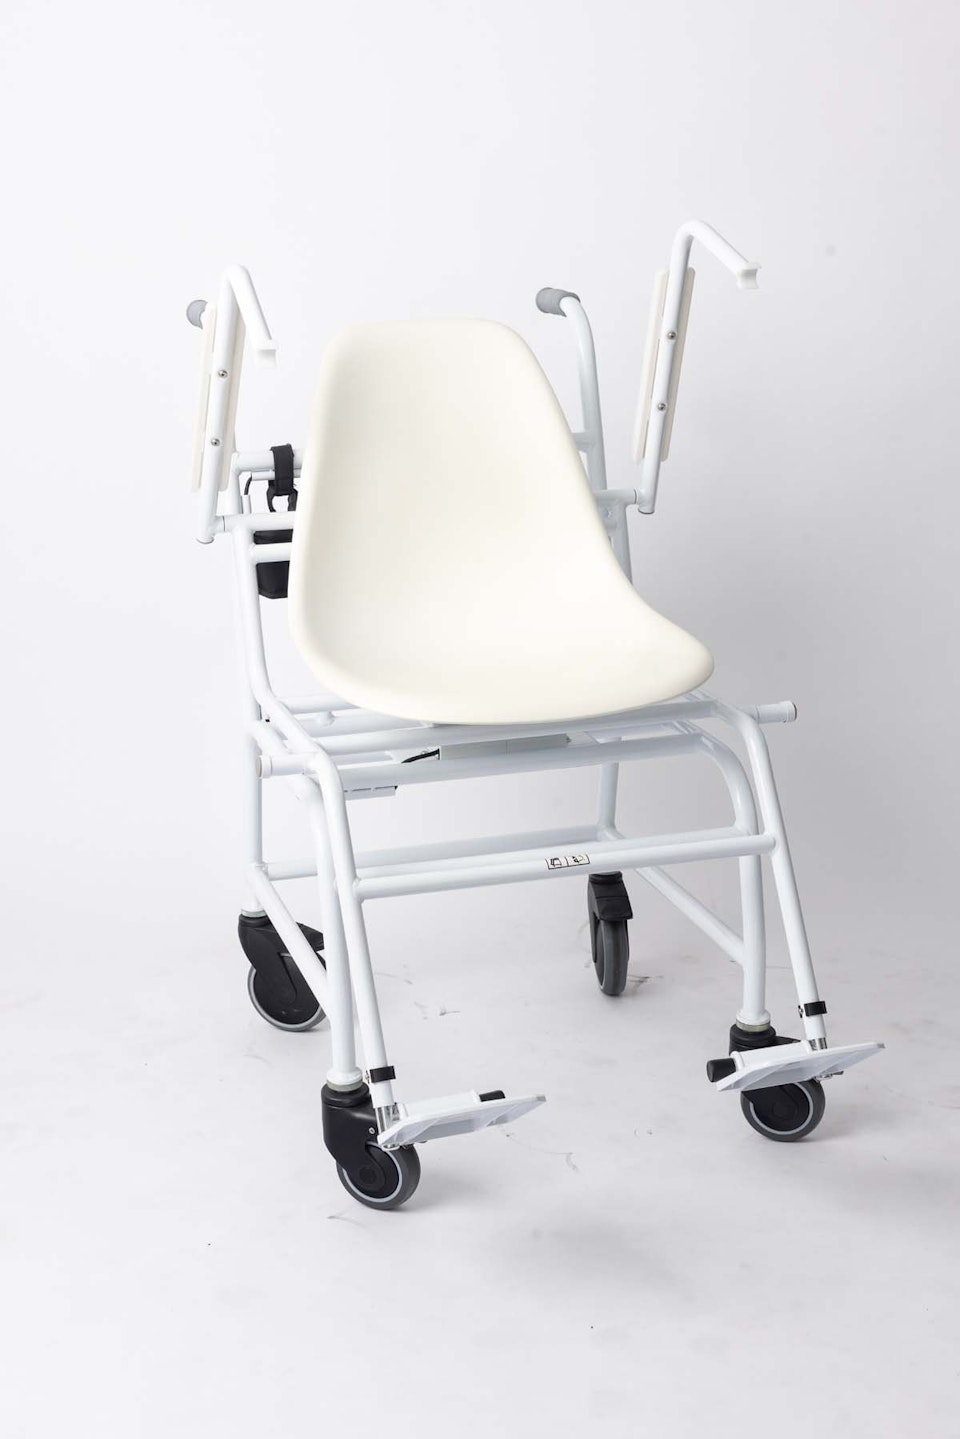 product-images 300kg-chair-scale-chr691-additional-1